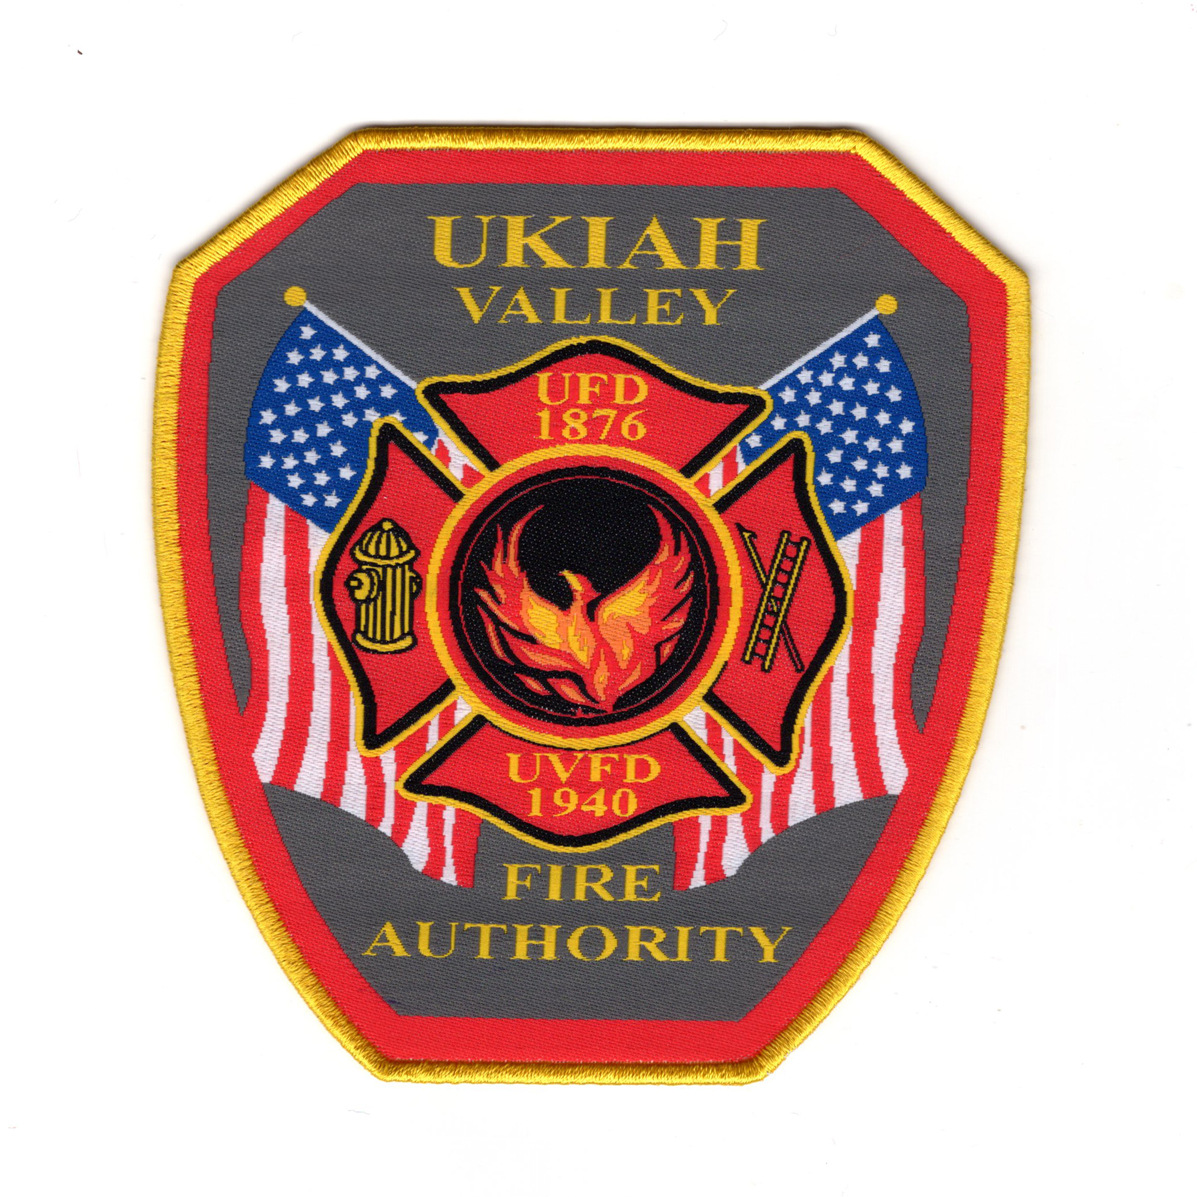 Ukiah valley fire authority woven patch